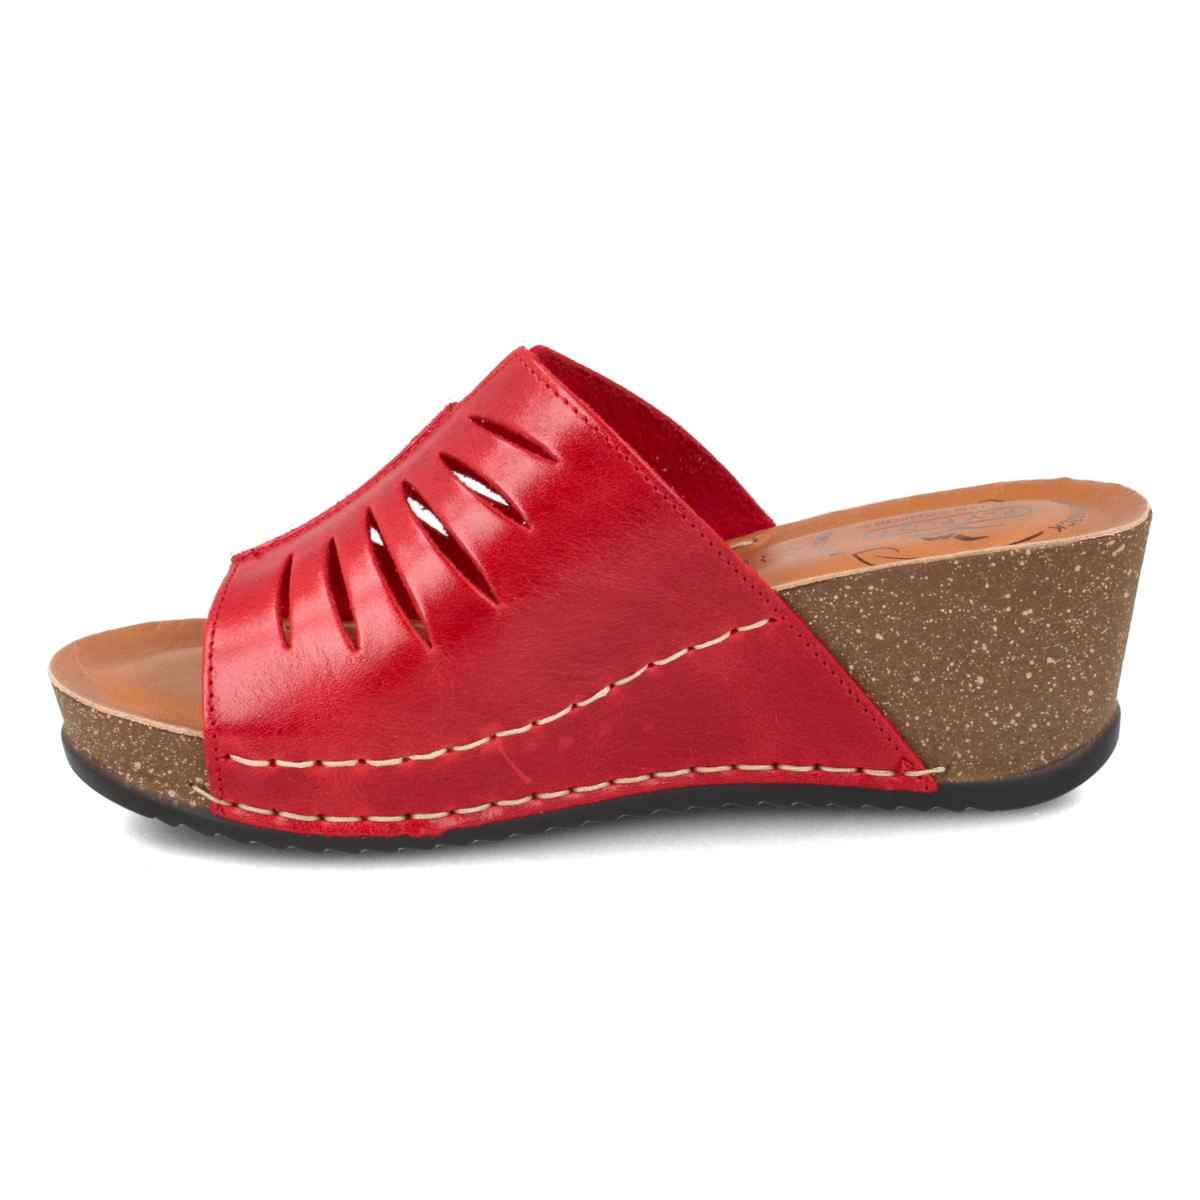 Leather Woman Slipper Red (33B10MG)